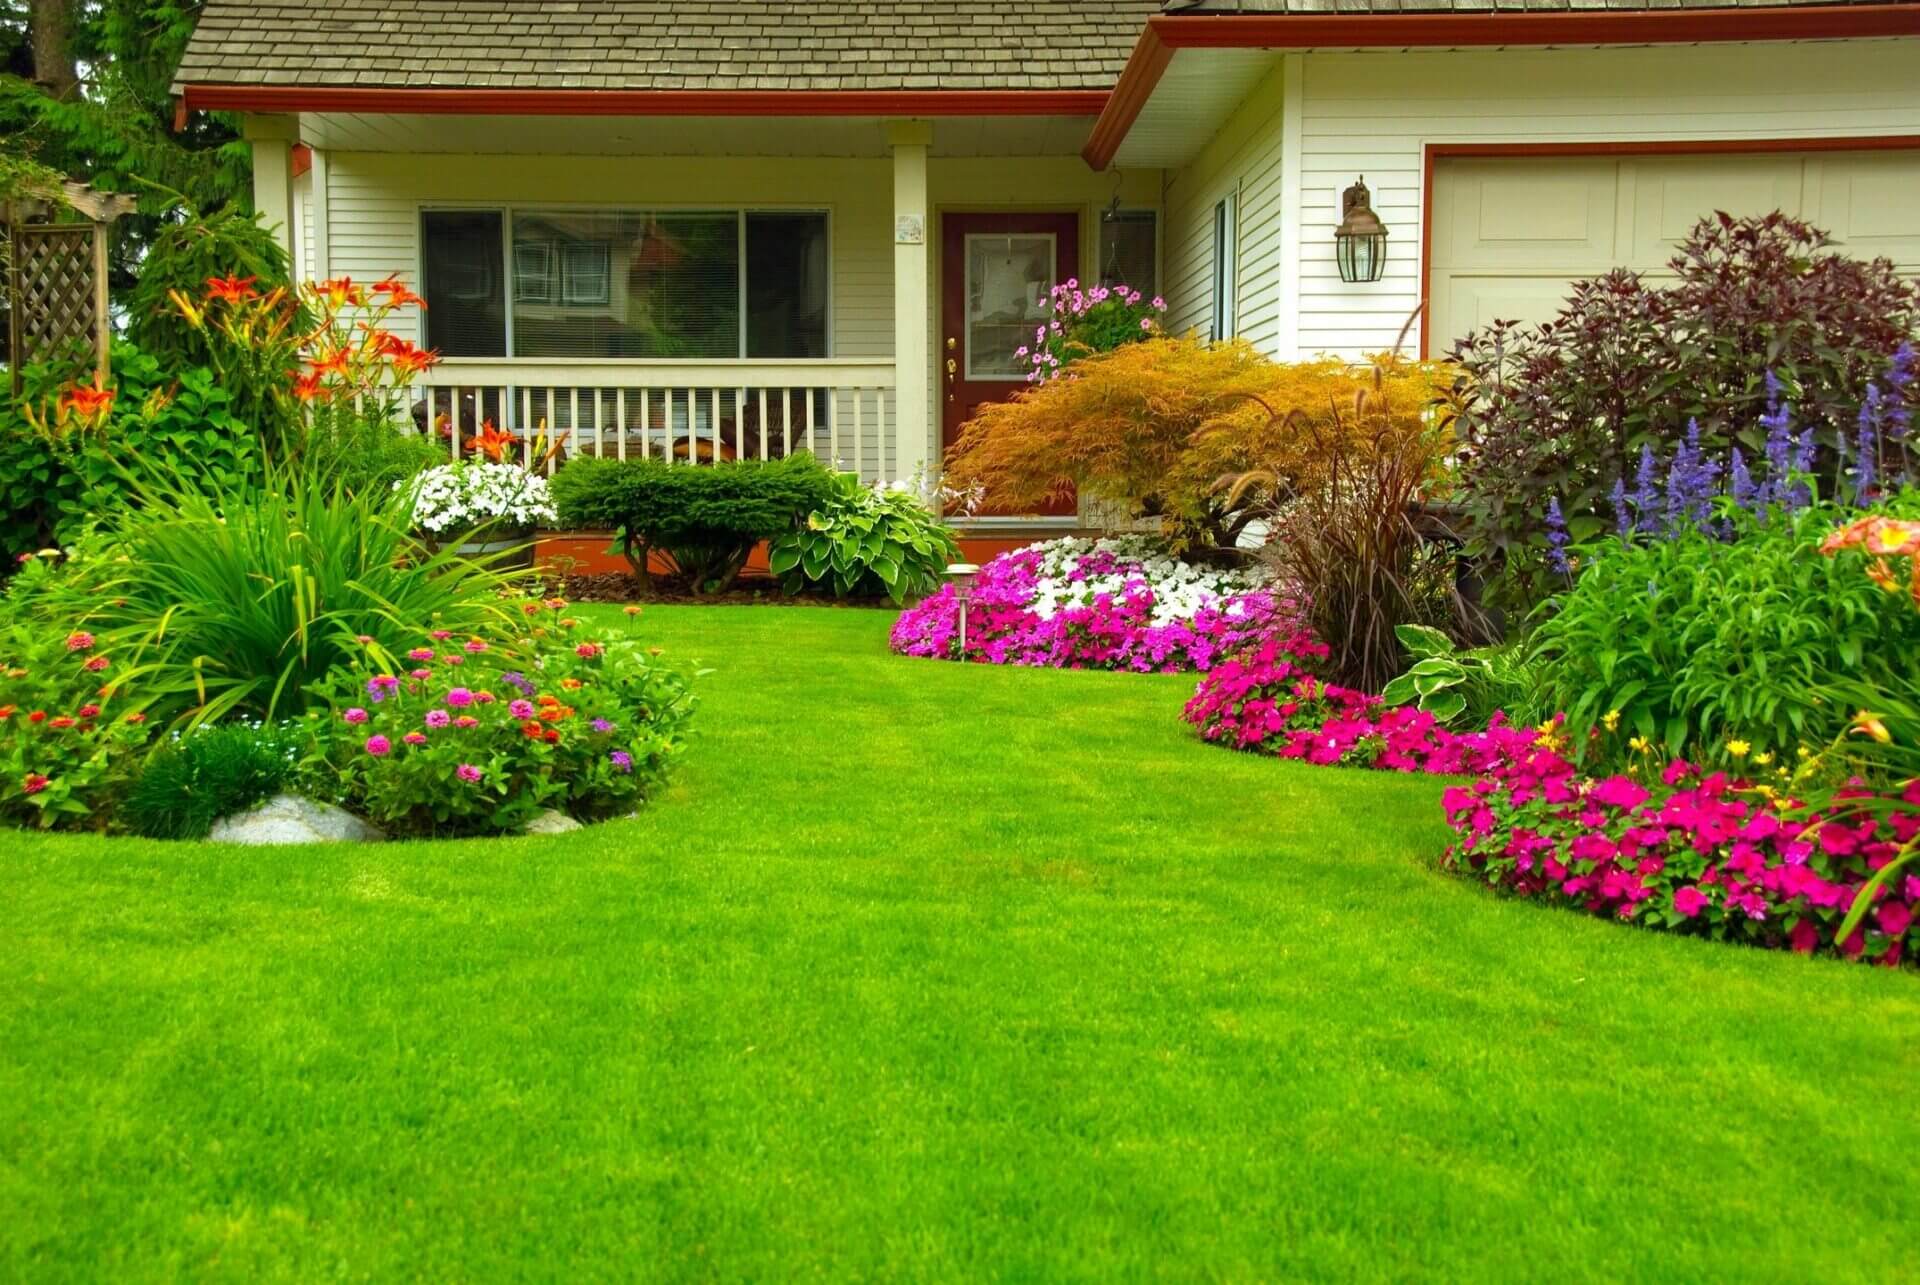 A Front Lawn With Flower Beds of Different Colors